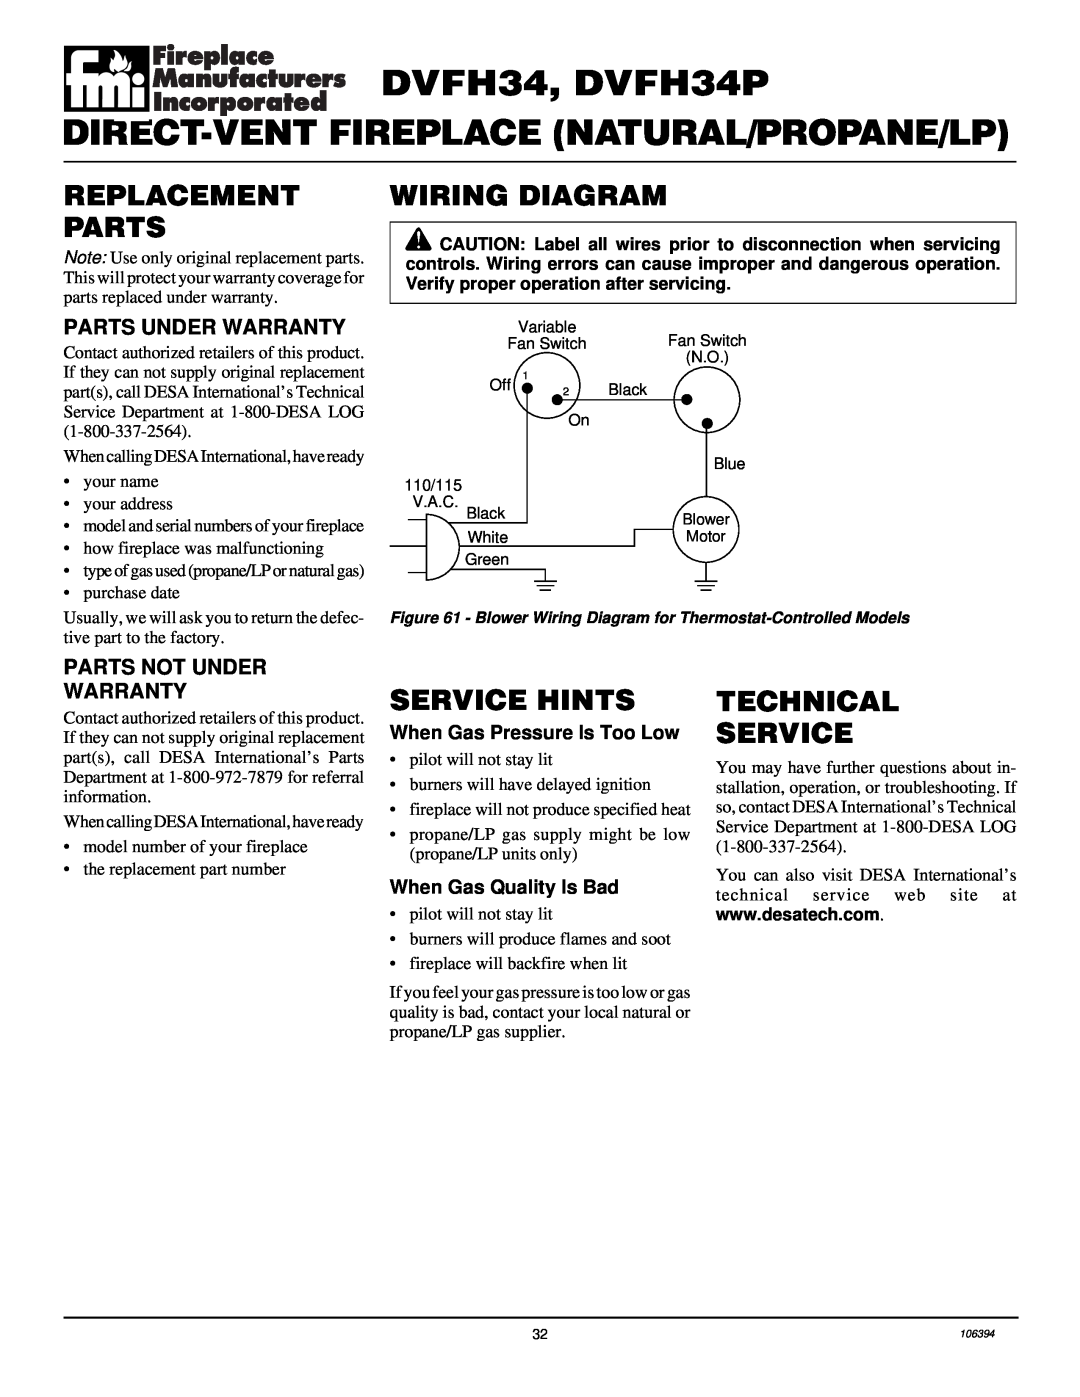 Desa Replacement Parts, Wiring Diagram, Service Hints, Technical Service, DVFH34, DVFH34P, When Gas Pressure Is Too Low 